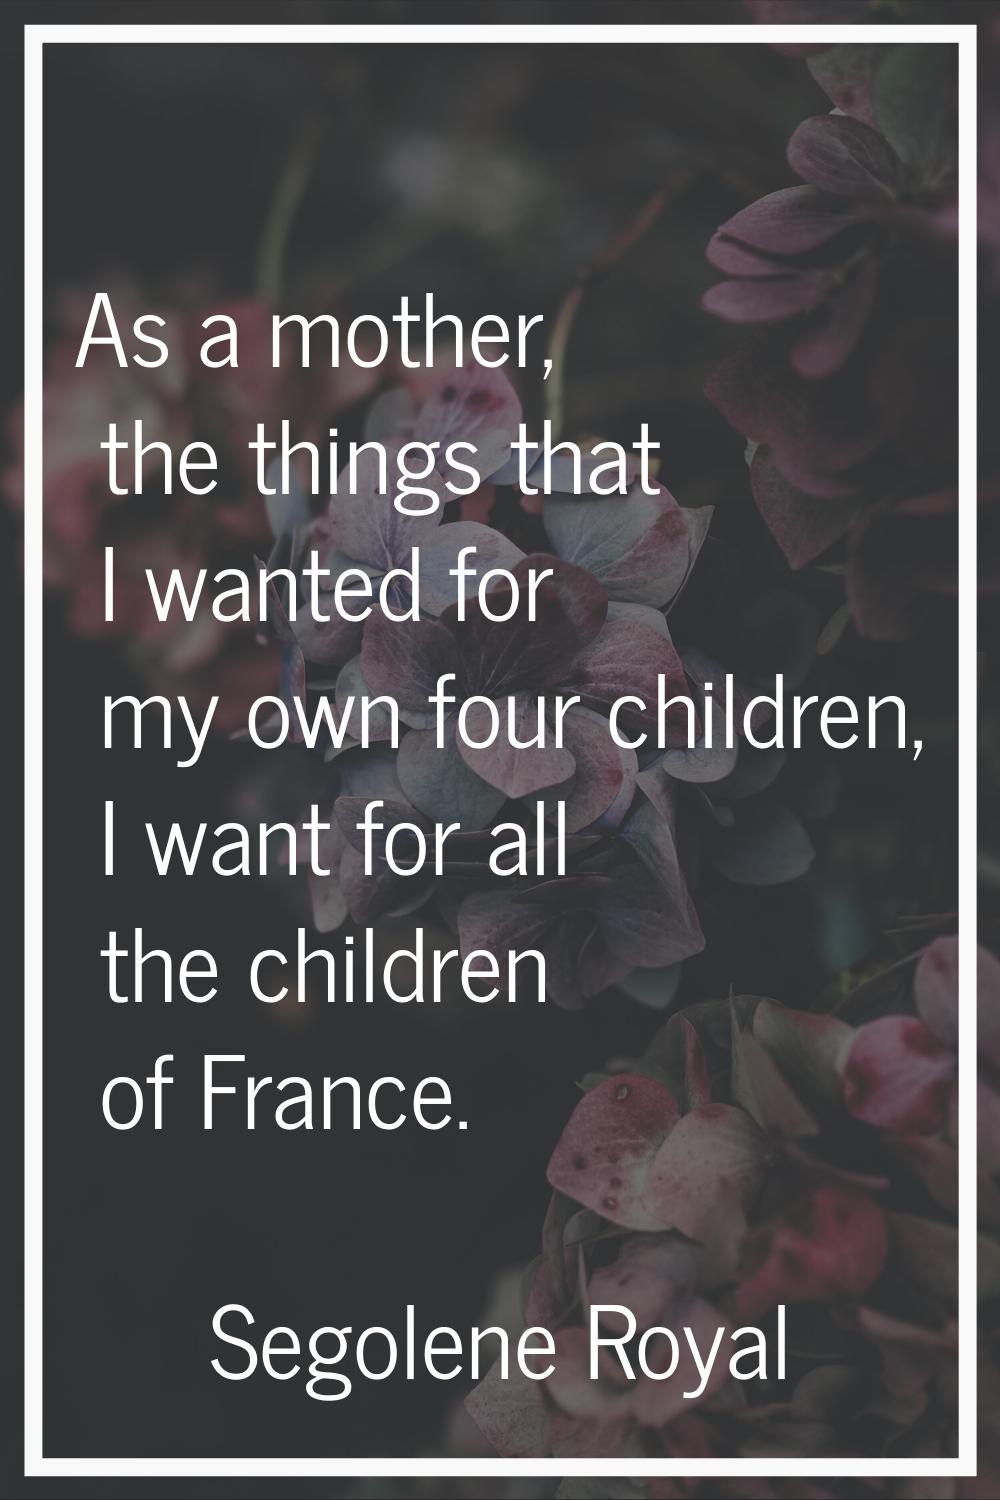 As a mother, the things that I wanted for my own four children, I want for all the children of Fran